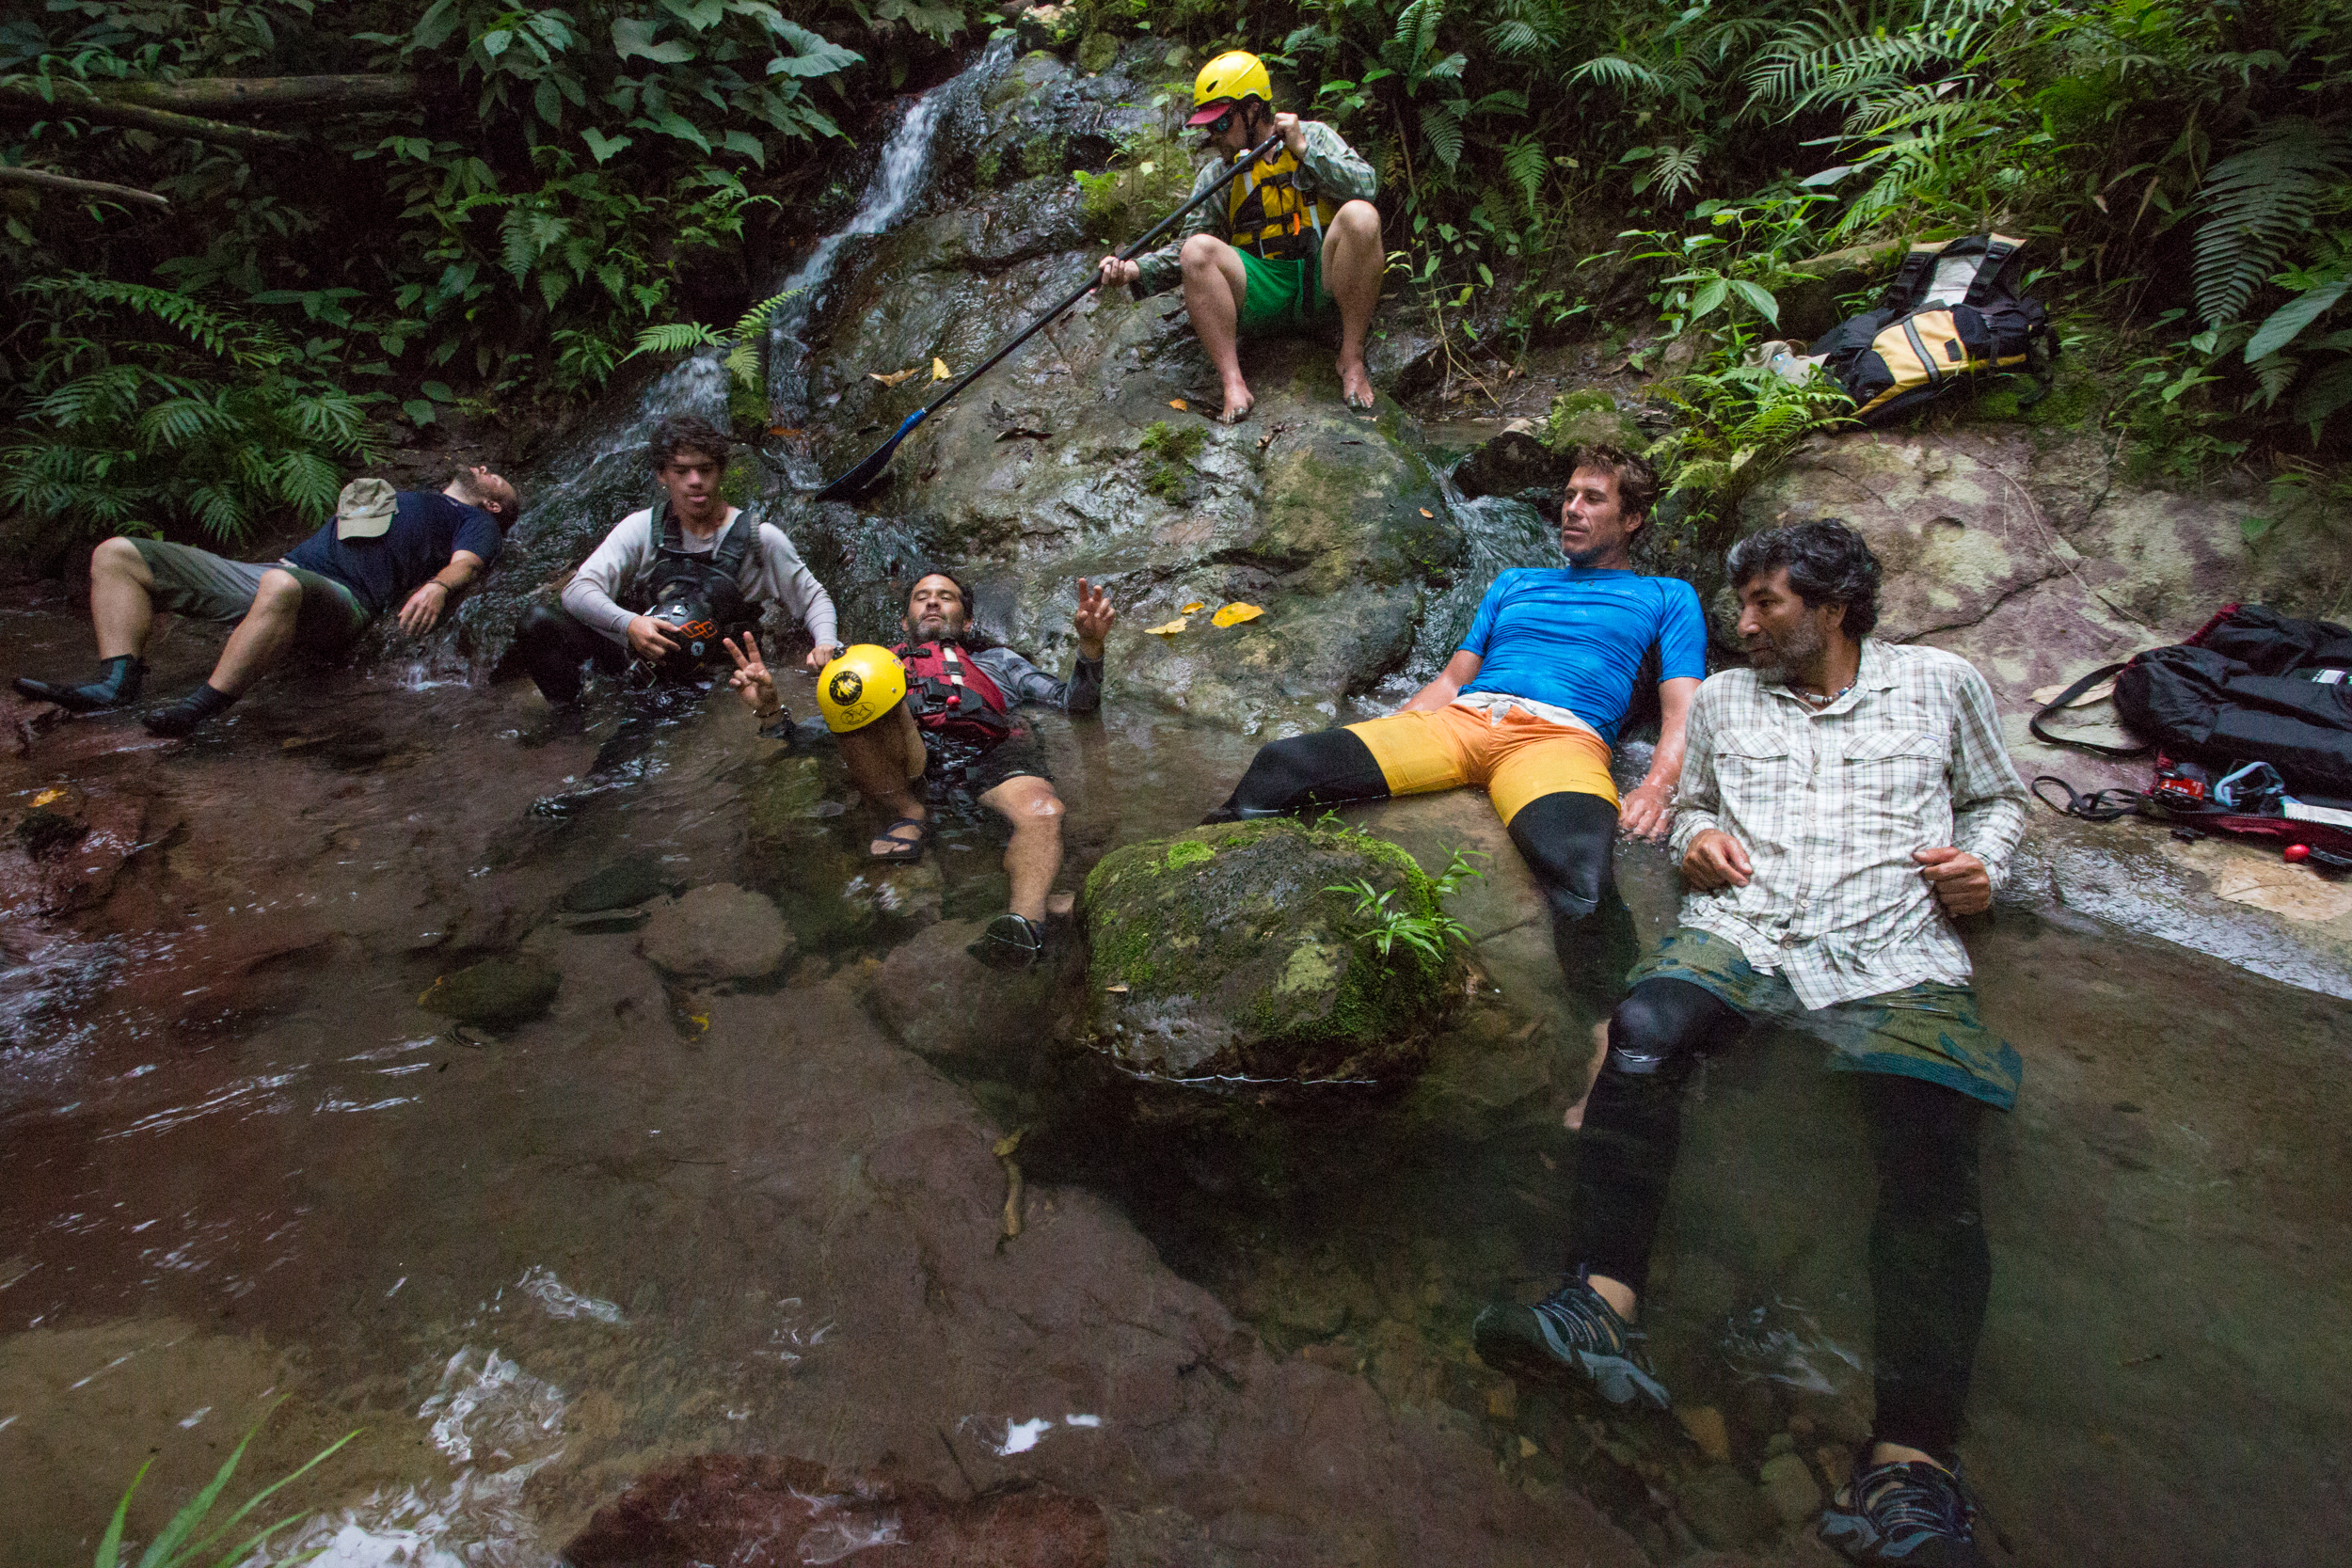 A group of SUP adventurers relax on a bank of the Madre de Dios river